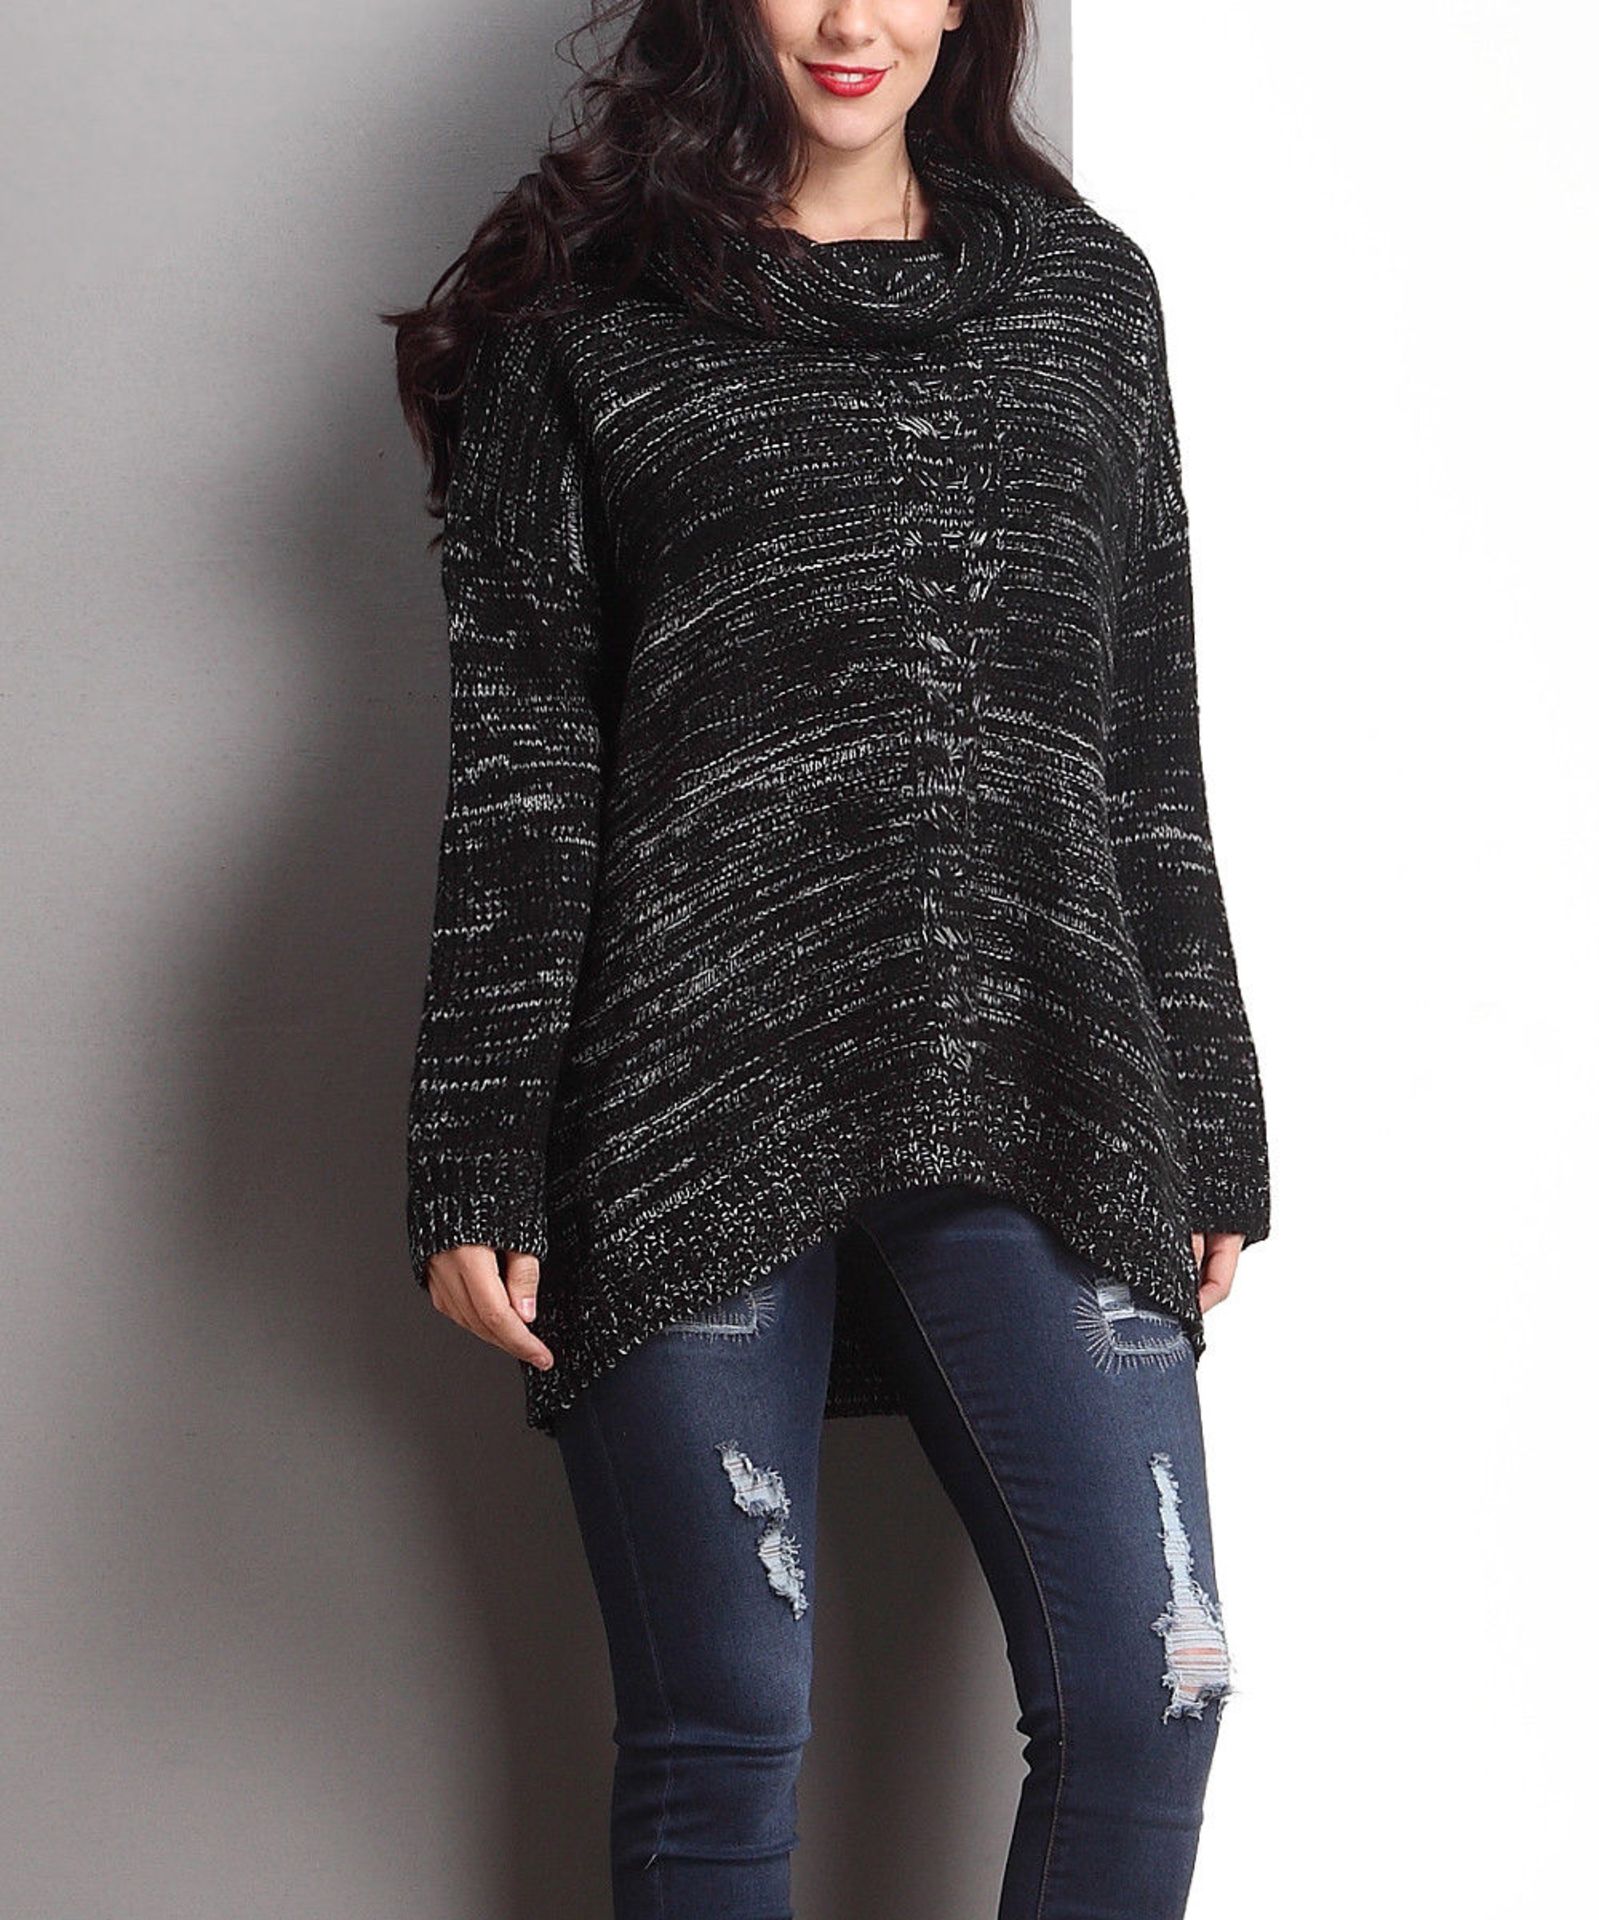 Reborn Collection Black Cable-Knit Cowl Neck Hi-Low Sweater - Plus (Uk 28:Us 24) (New with tags) [